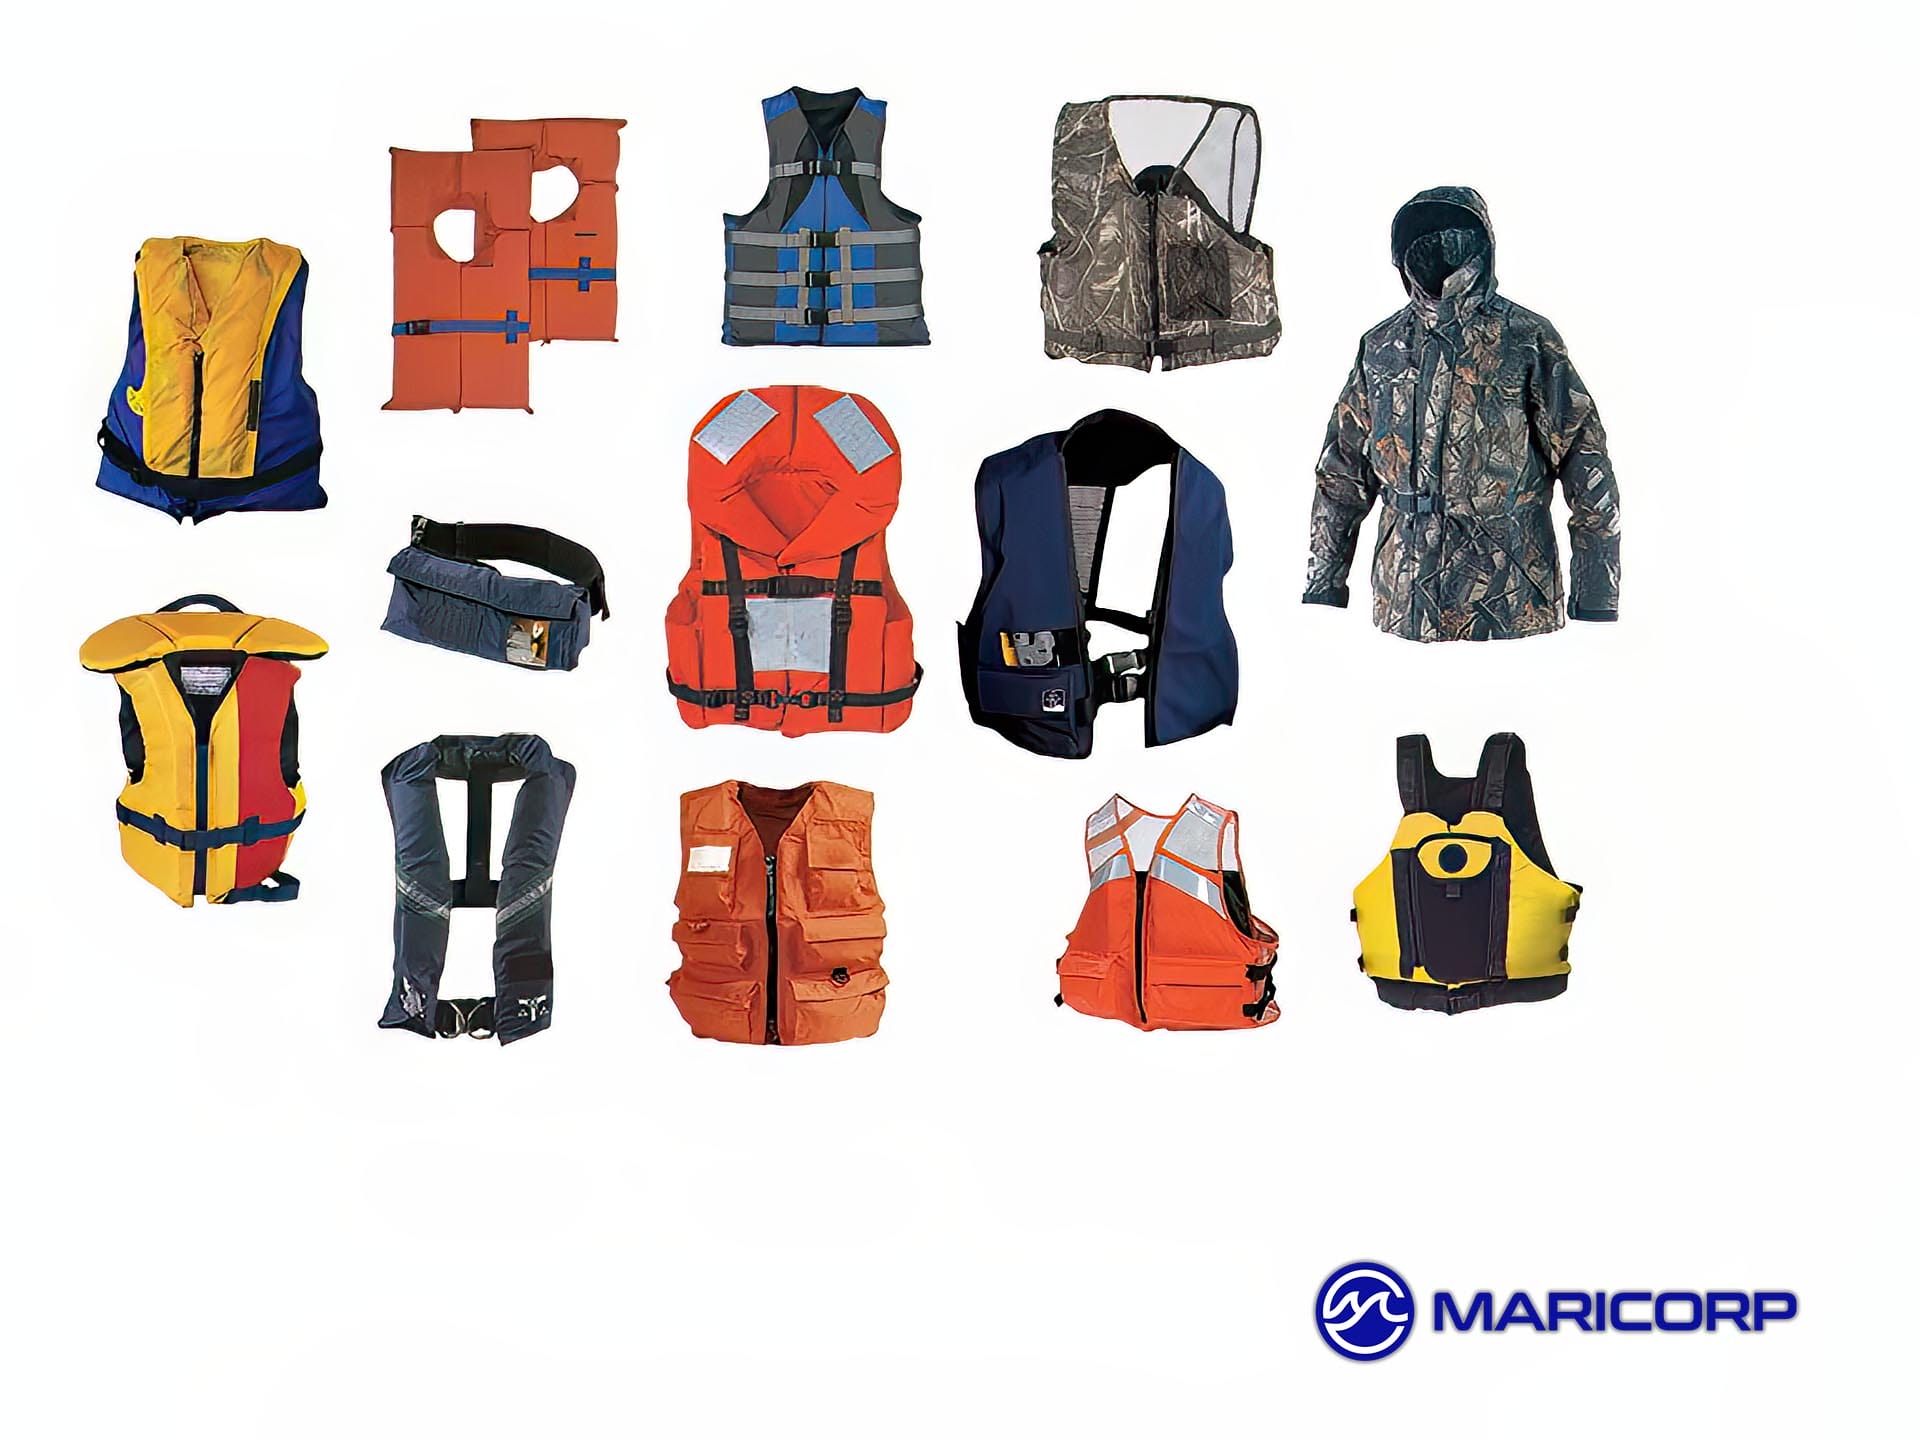 CHOOSING A LIFE JACKET – THE FIRST STEP TO BOATING SAFETY